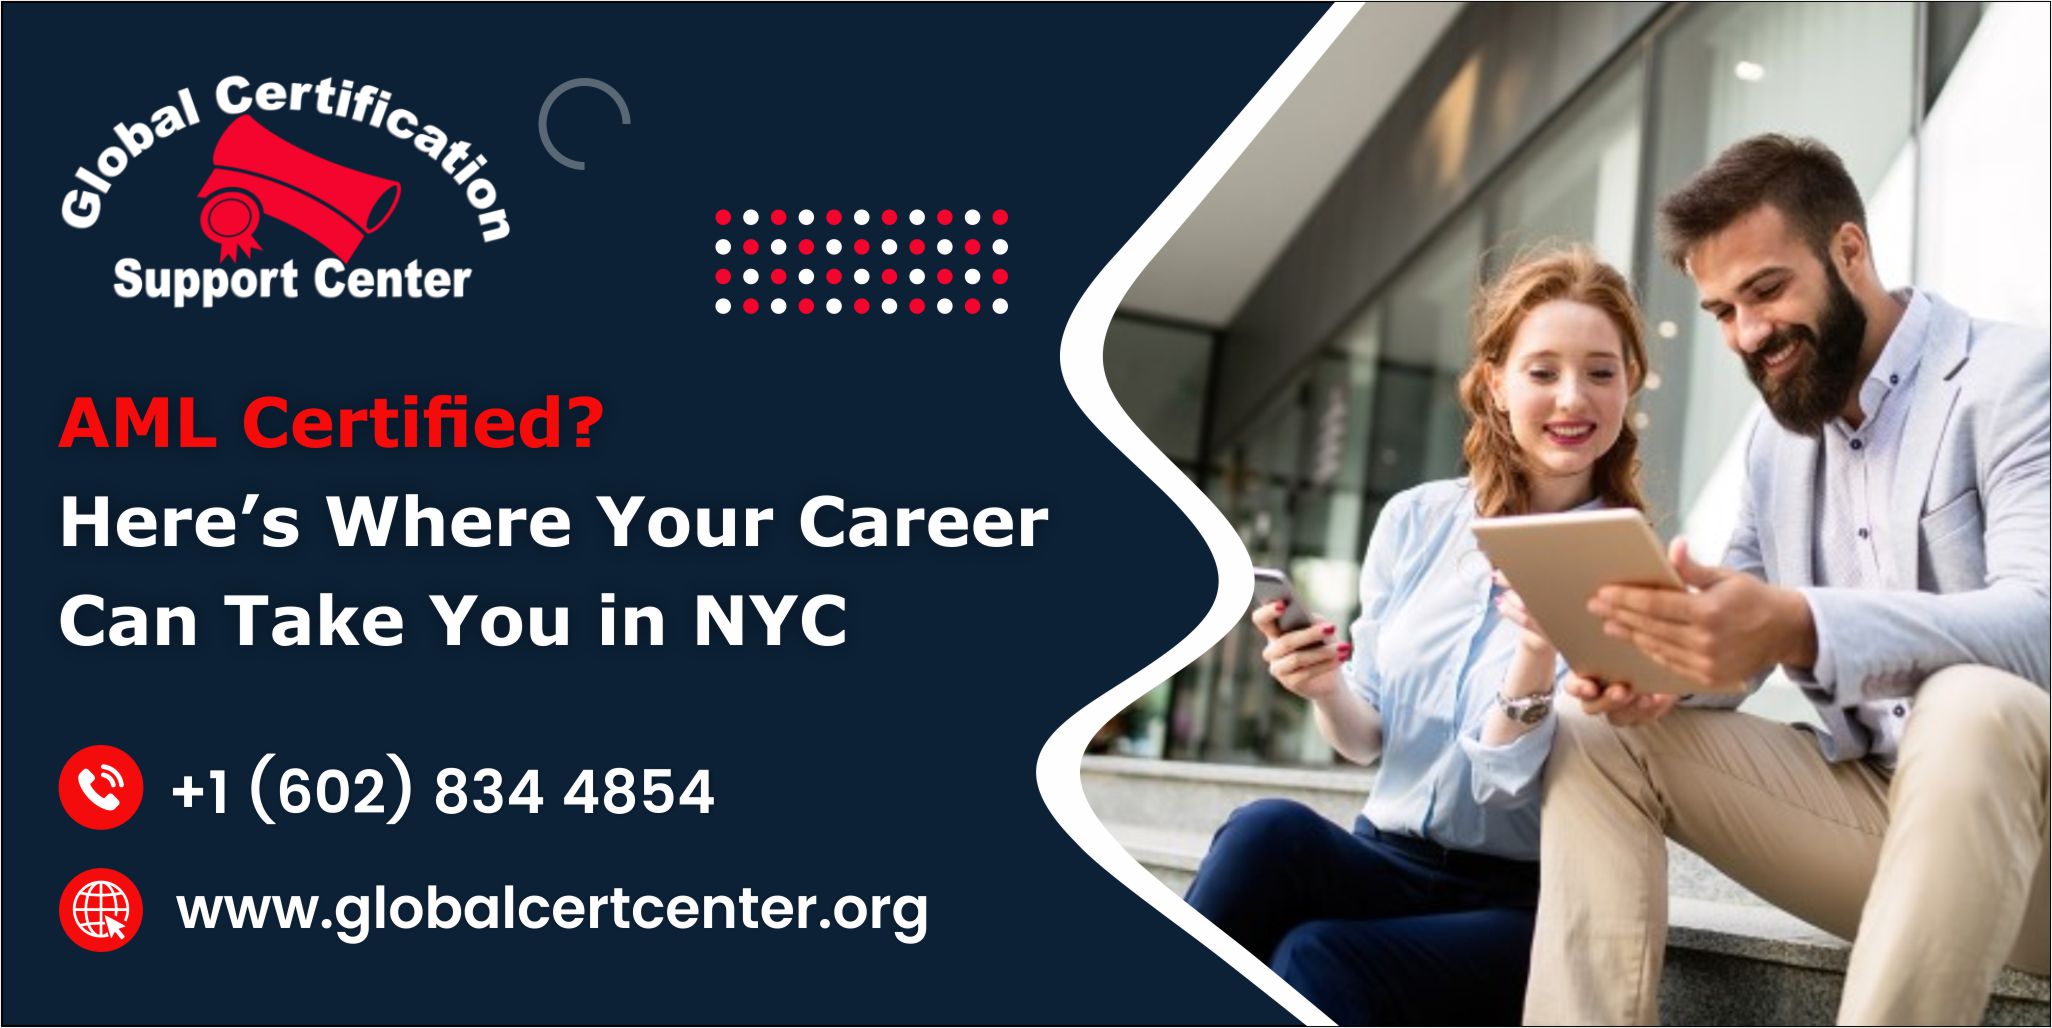 APICS certifications in NYC